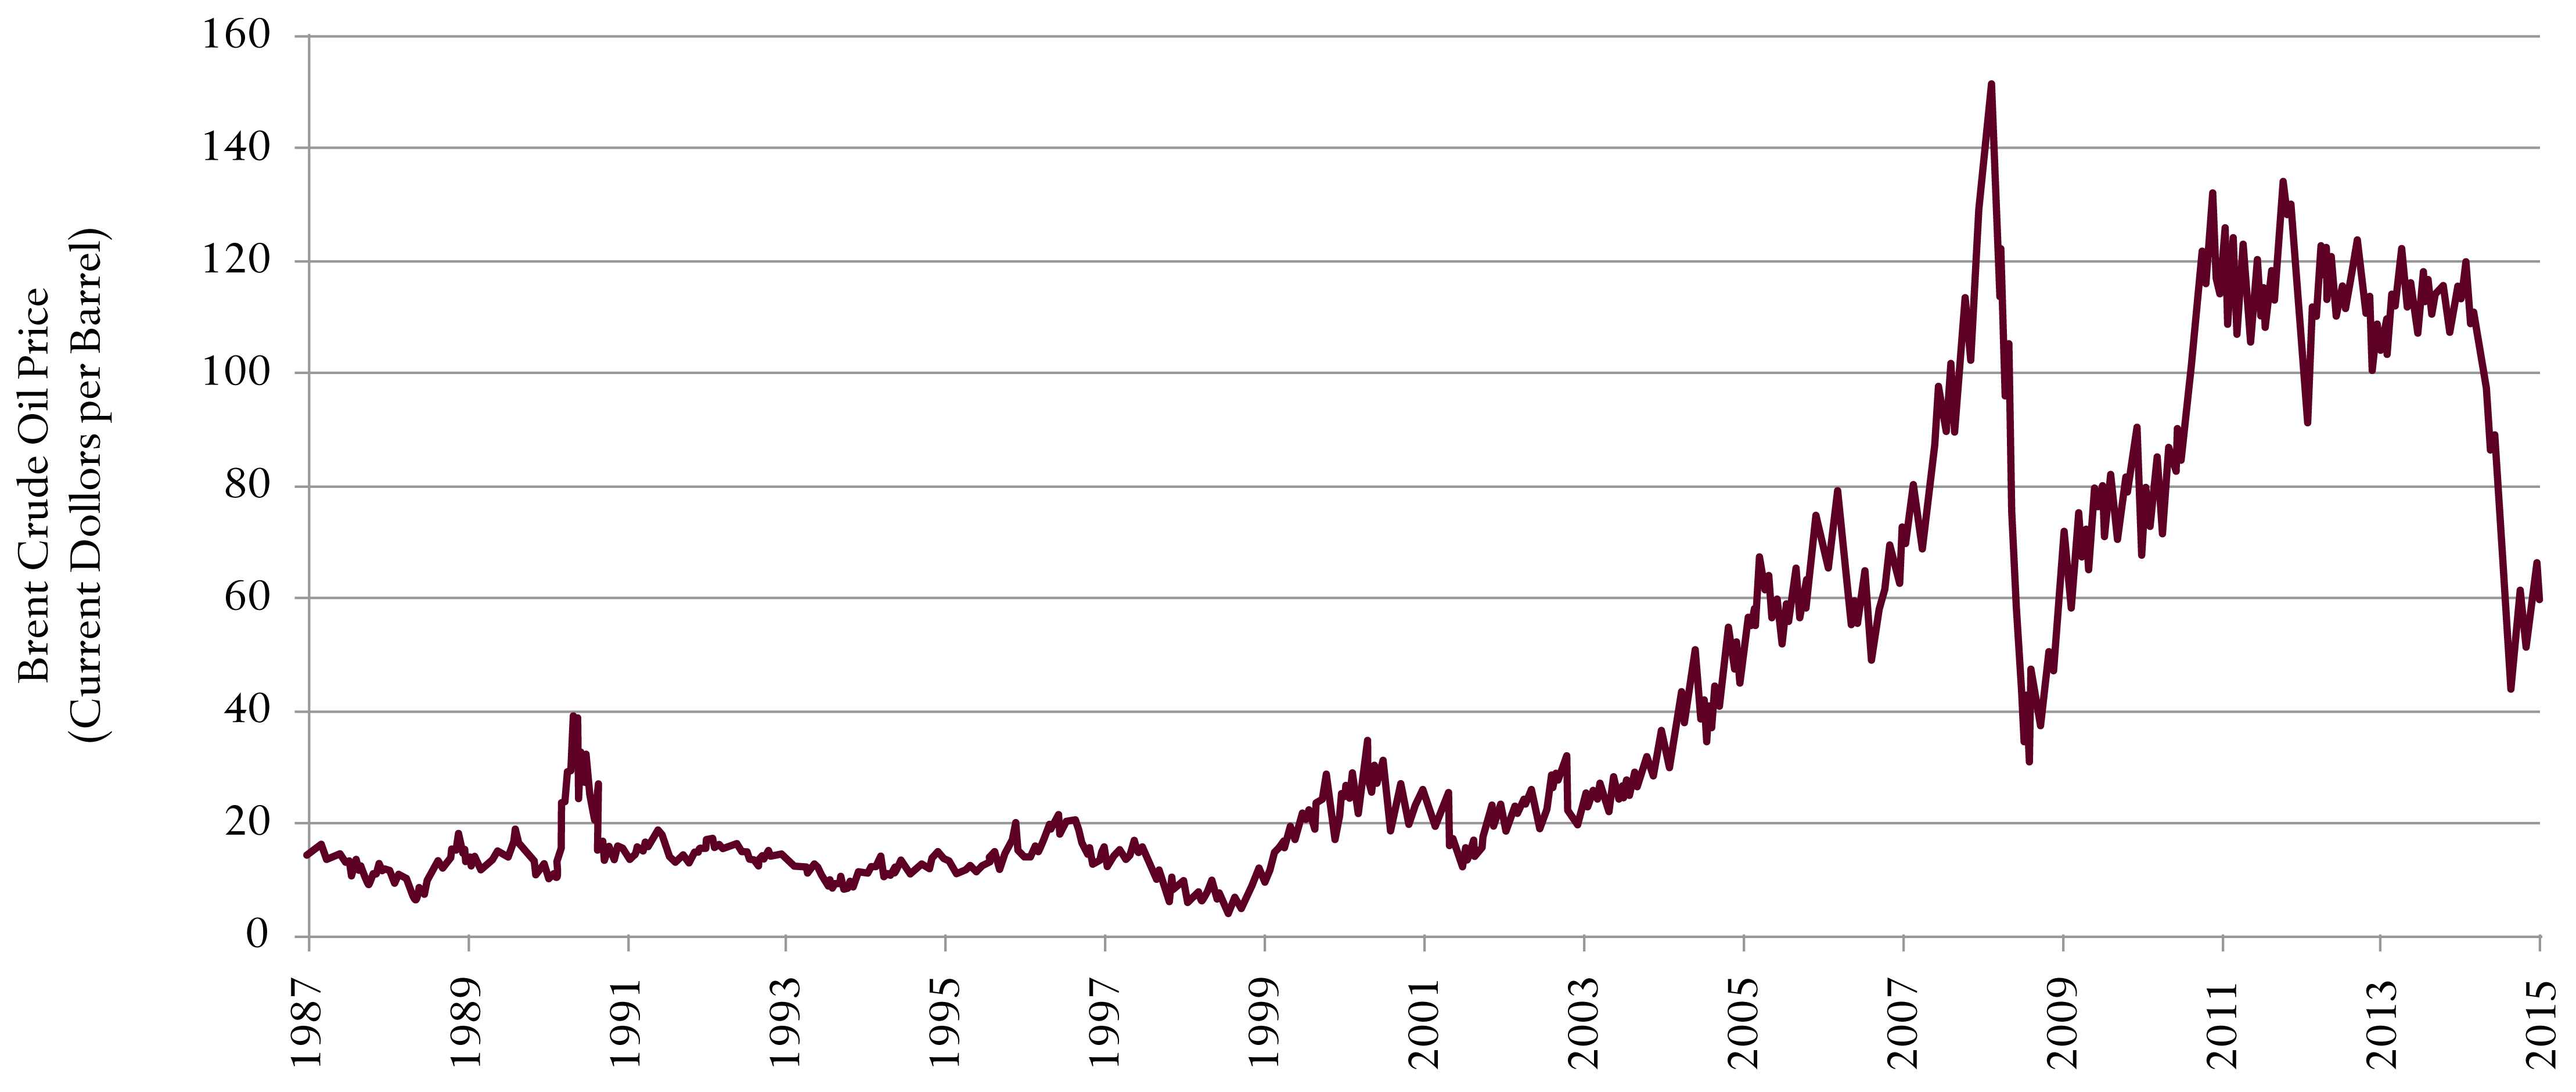 Historical Crude Oil Prices Chart